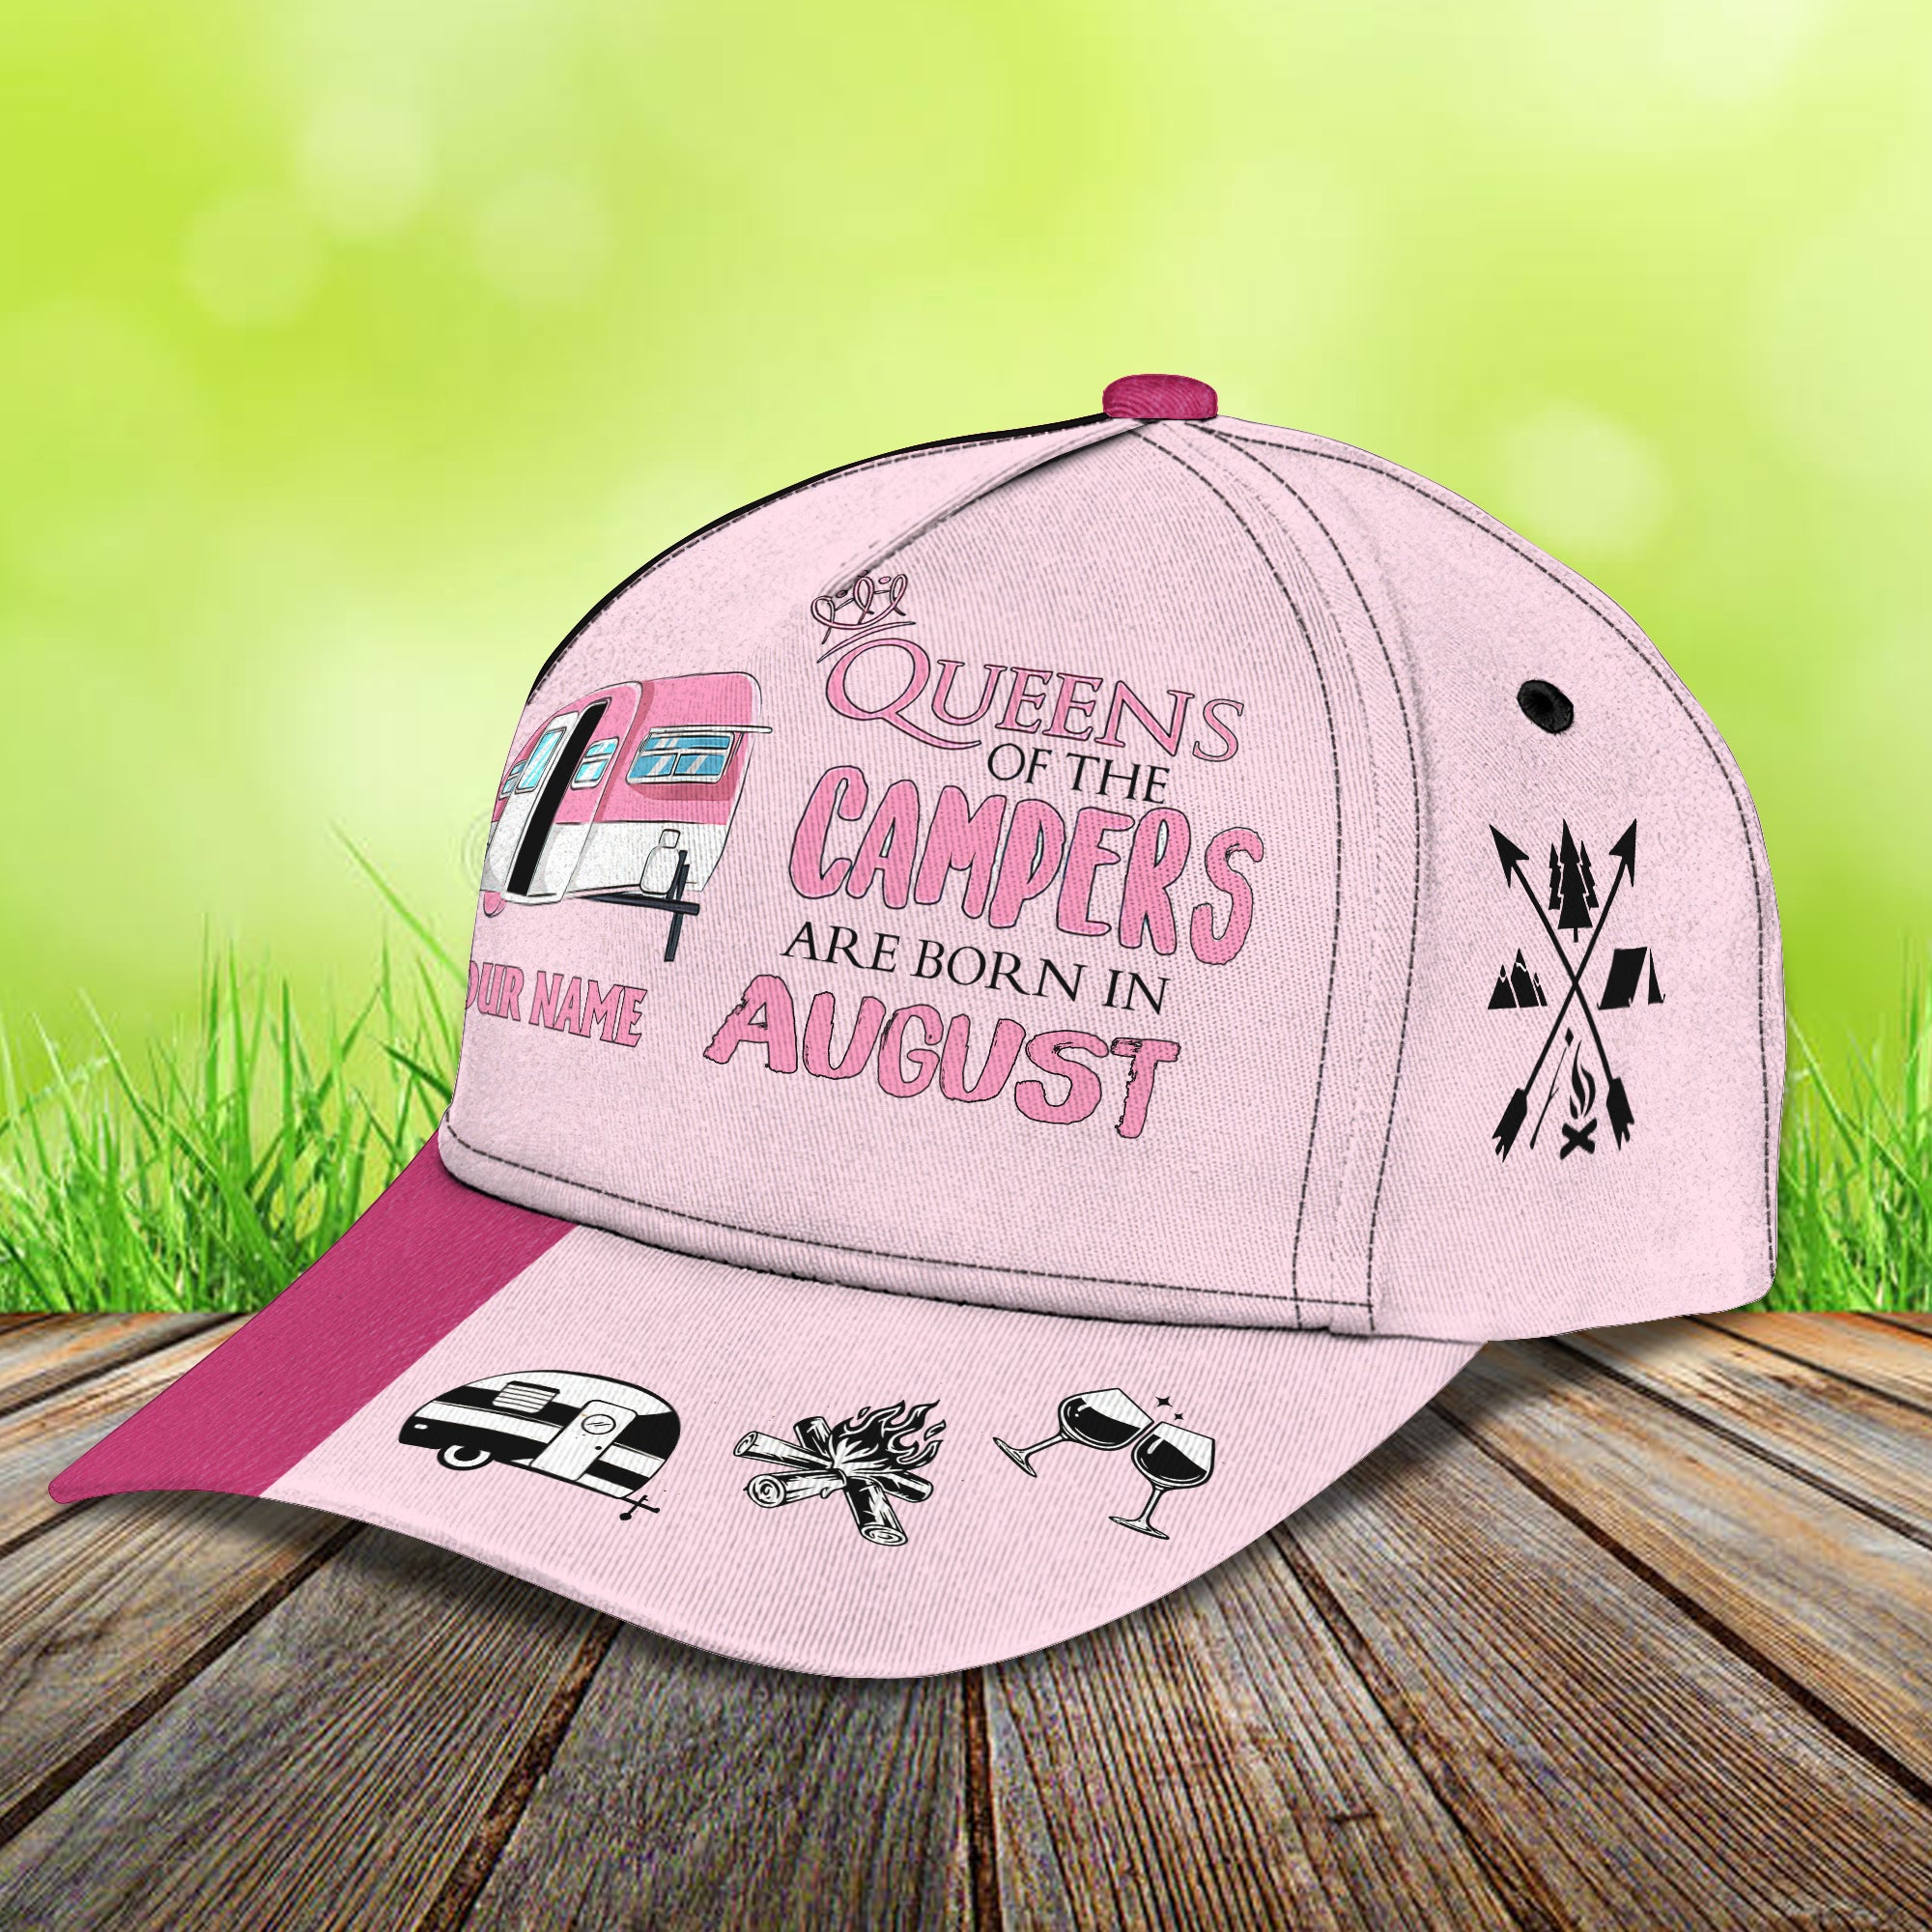 Queen Of The Campers (August)- Personalized Name Cap 15- Lta98